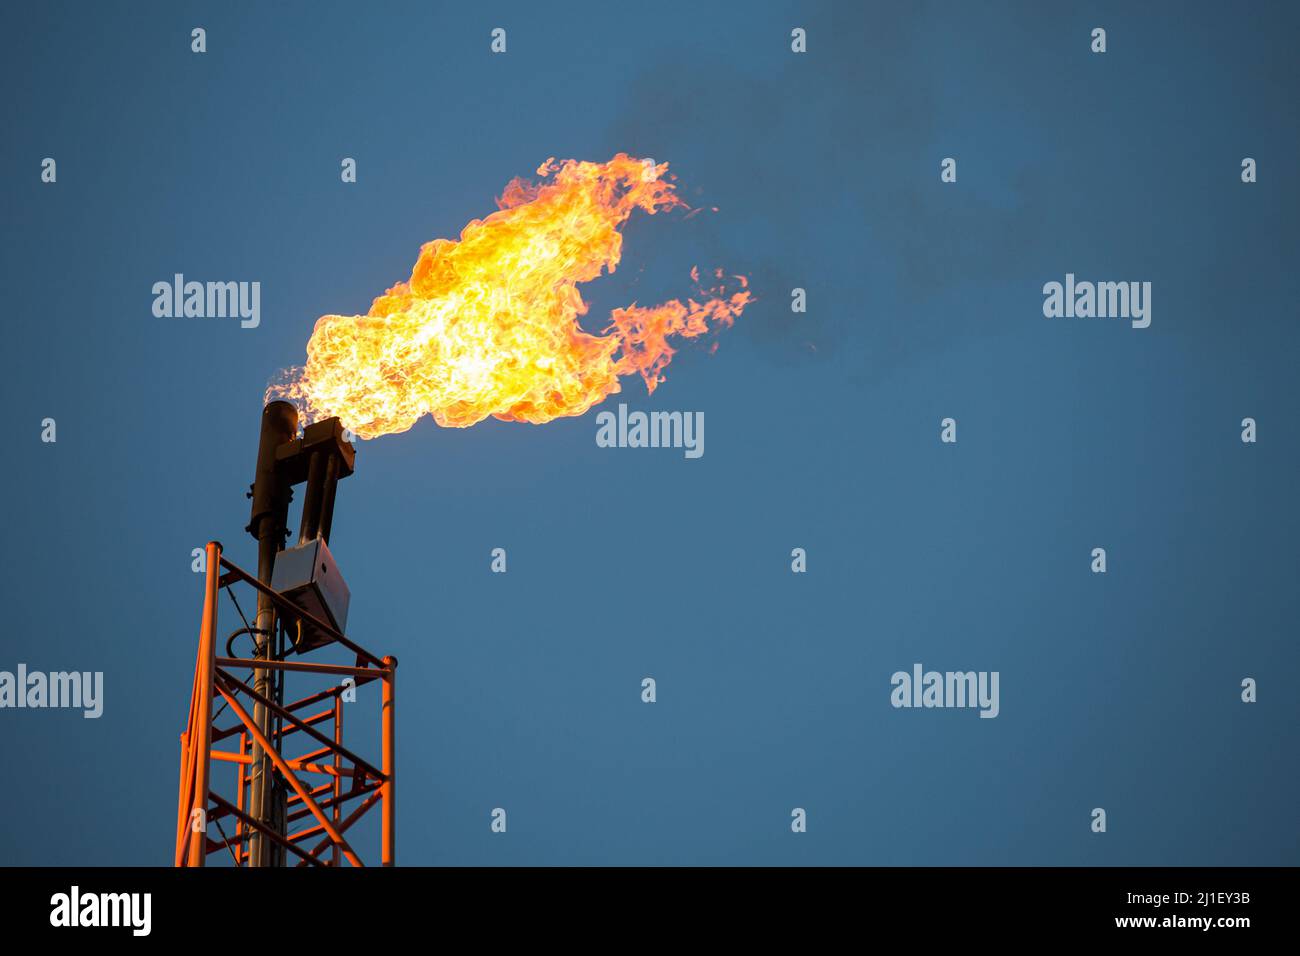 December 25, 2021, Lakie, Poland: A burning flare seen at an oil extraction area located in Lakie, Lubusz Voivodeship. The characteristic flaming flare is formed by the combustion of natural gas, which is extracted along with crude oil. It is used when the operator does not have a gas transmission installation or the further management of the extracted raw material is economically unprofitable. PGNiG (Polish Oil Mining and Gas Extraction S.A.) plans to spend PLN 10.8 billion on investments in 2022, the company announced in its annual report. The estimated oil production in Poland in 2022 is 0. Stock Photo